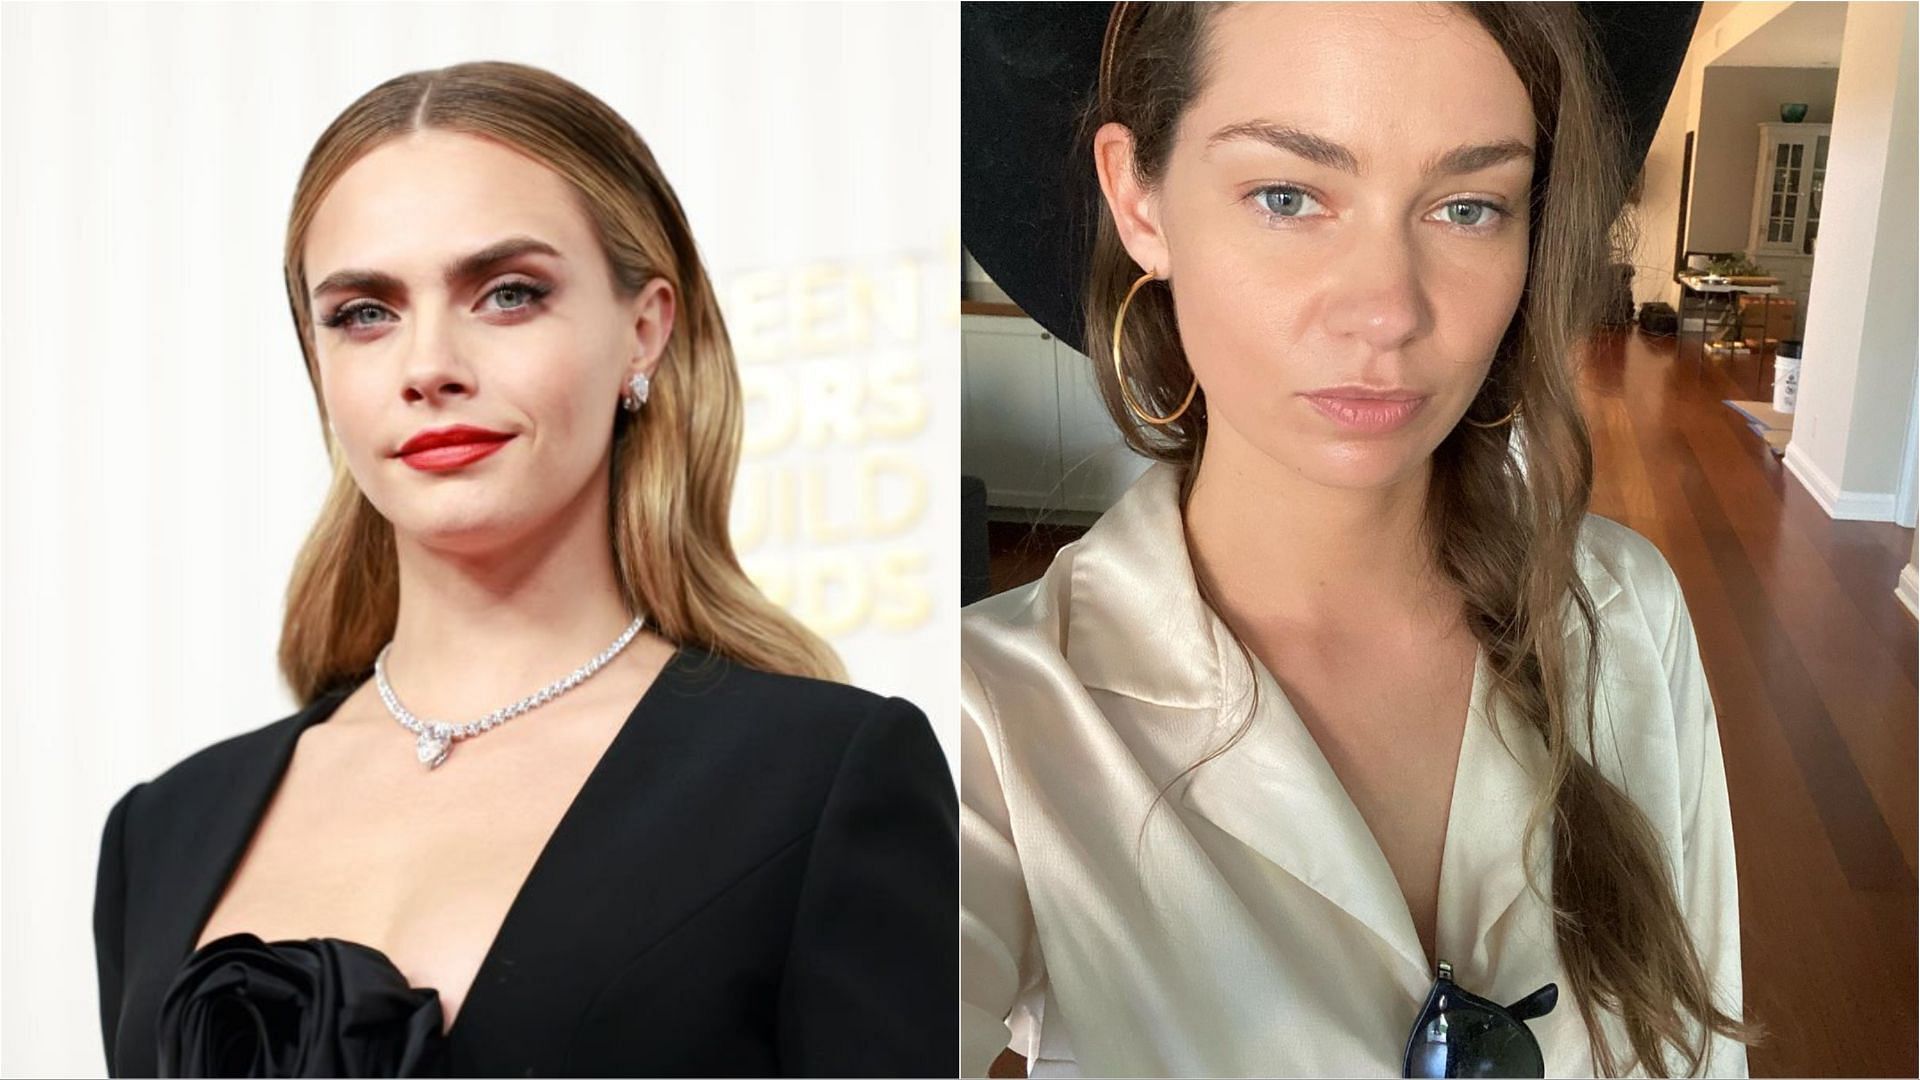 Cara Delevingne spoke about her new girlfriend Minke in an interview (Images via Emma McIntyre/Getty Images and minke/Instagram)